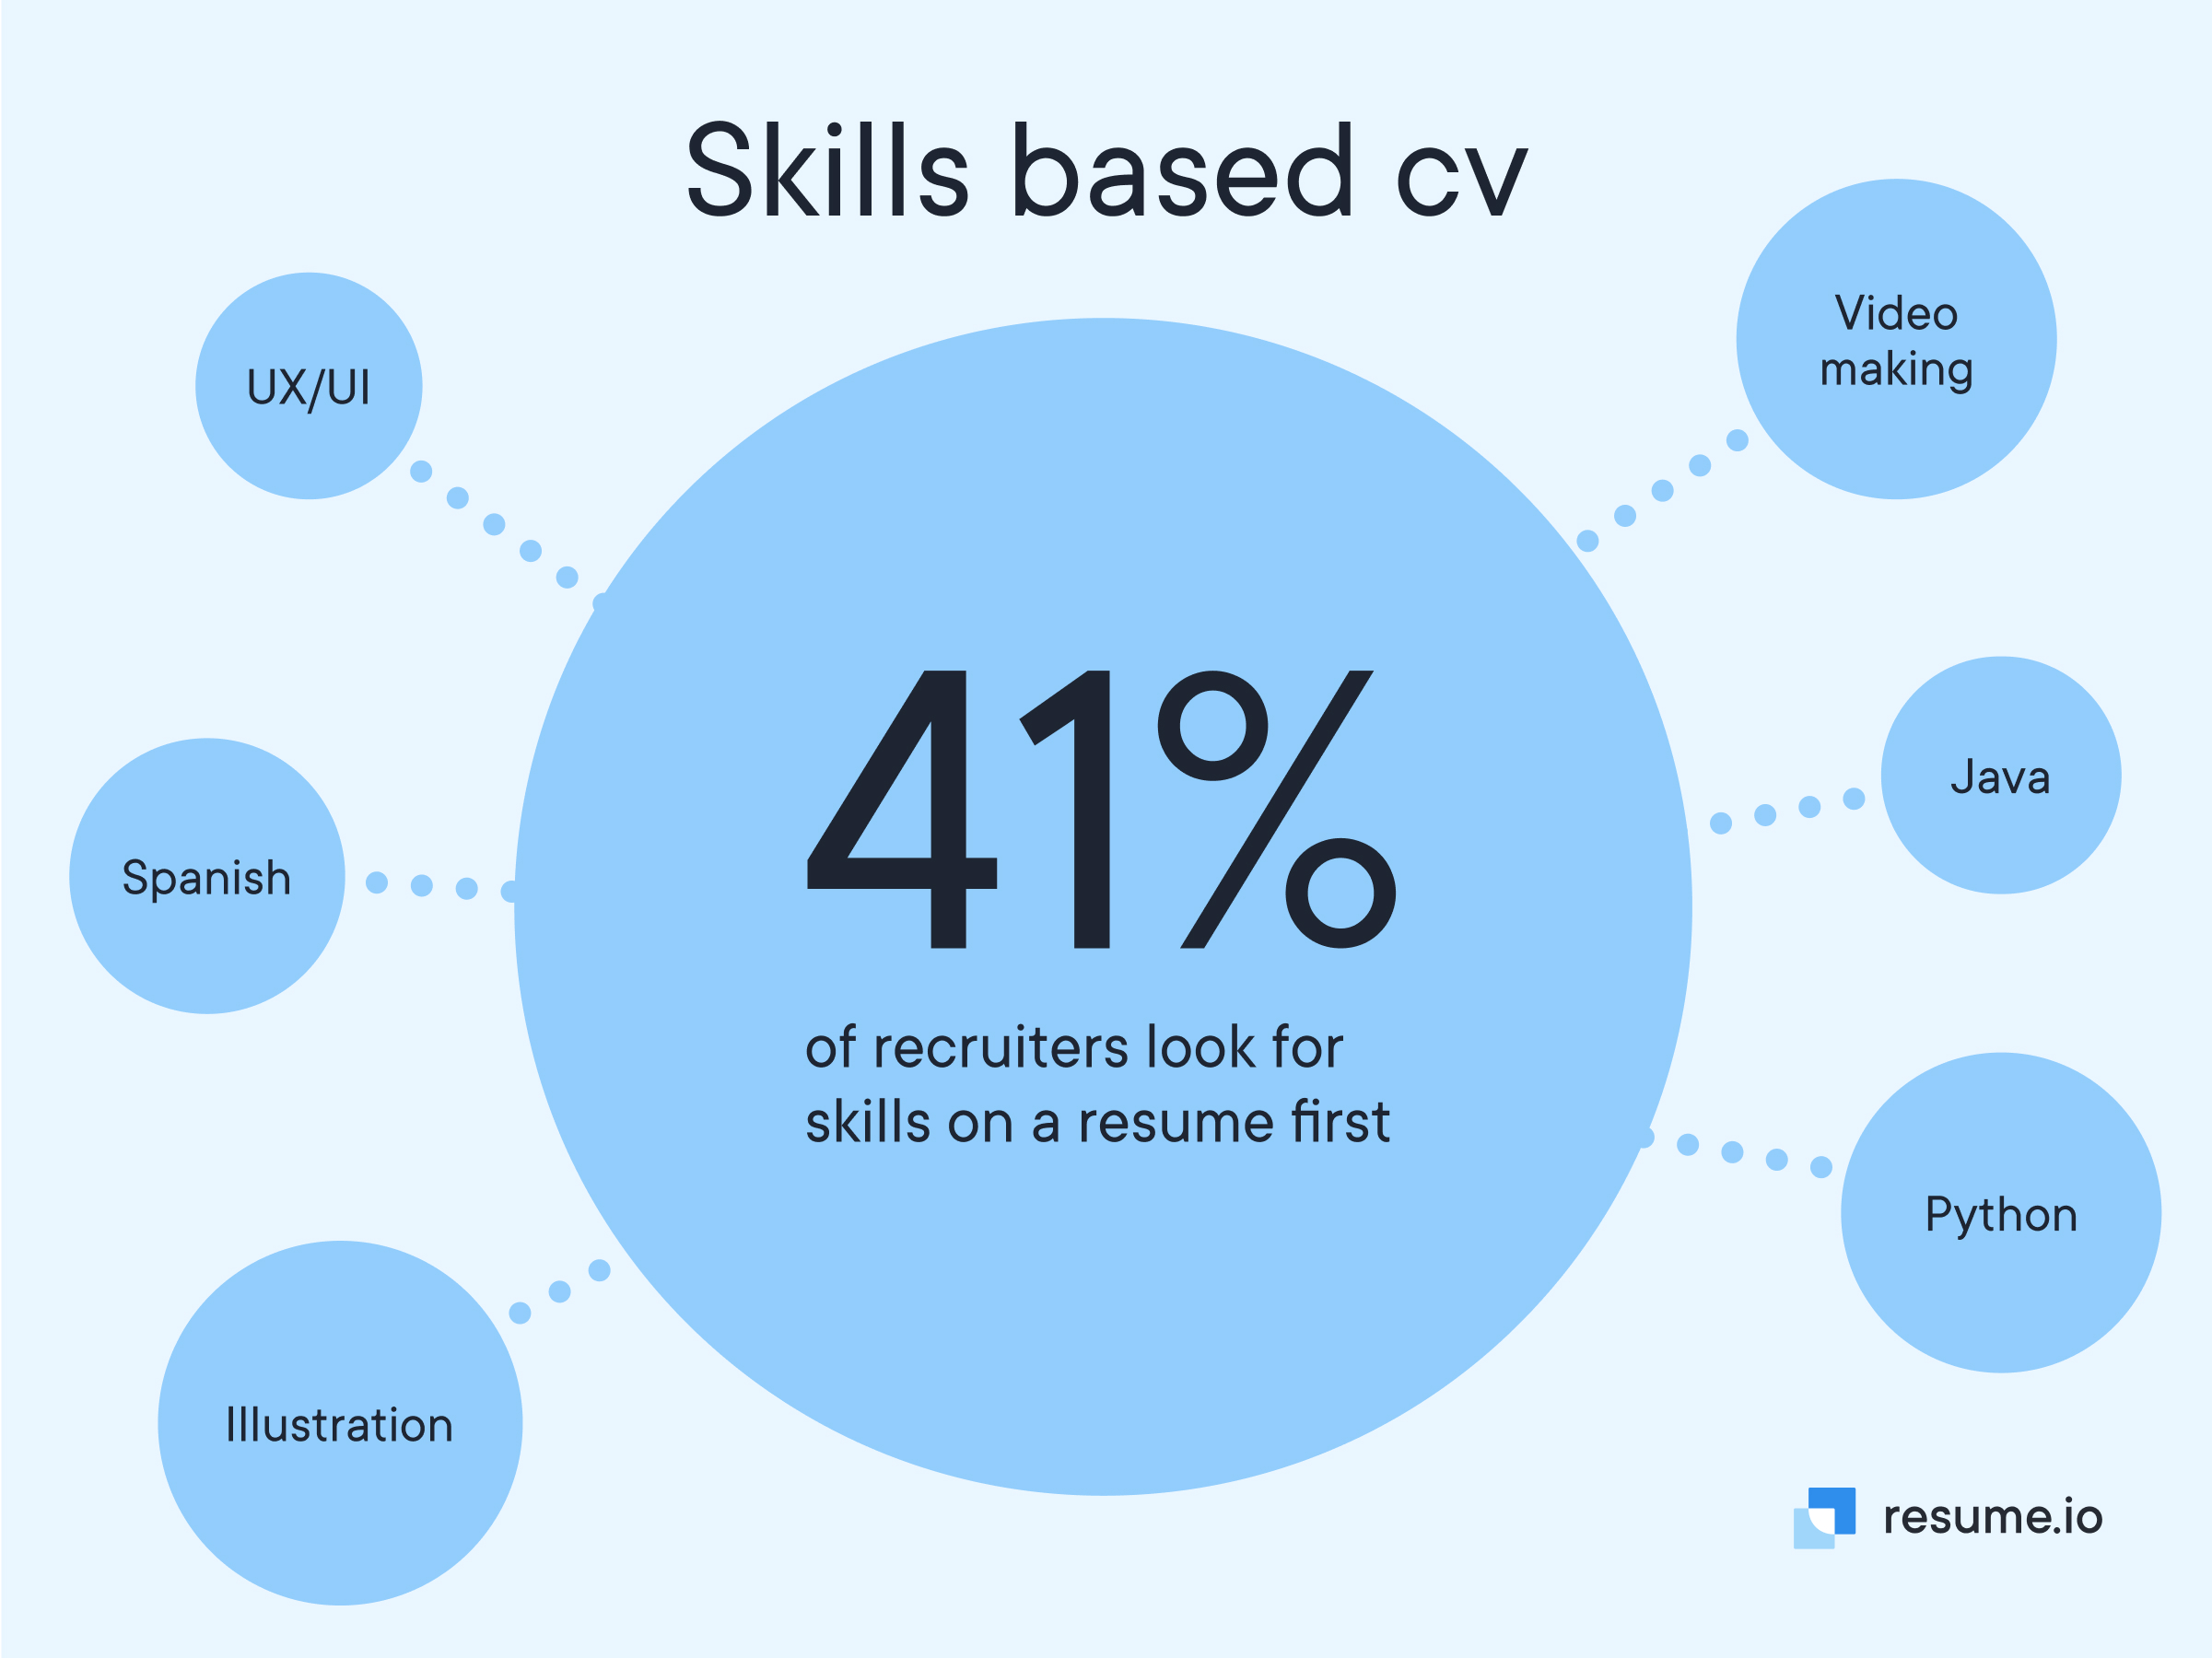 41% of recruiters look for skills on a resume first